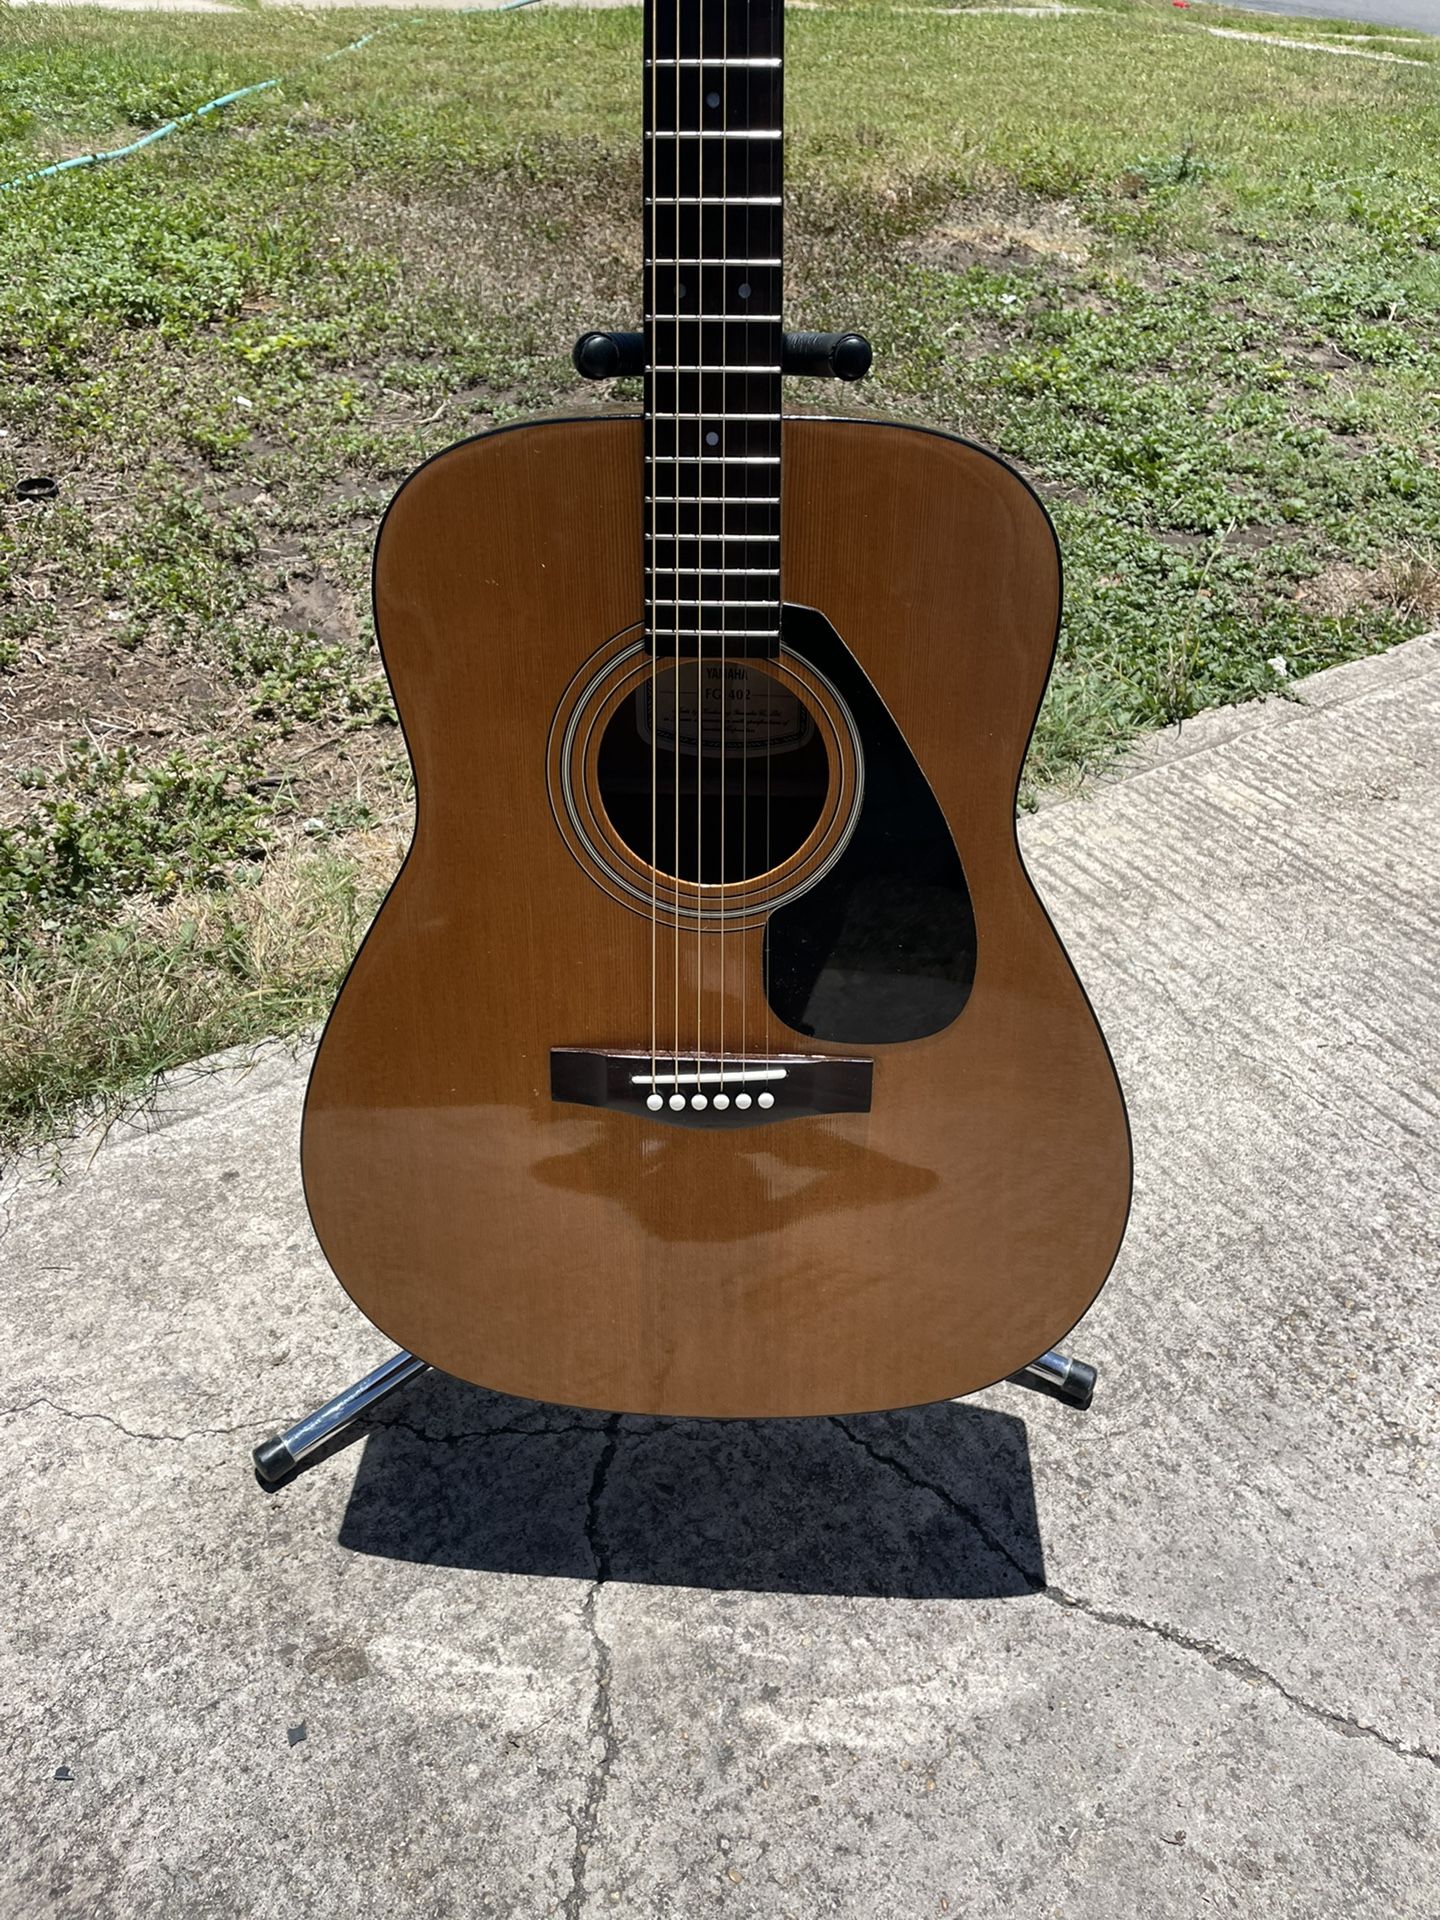 Yamaha Acoustic FG402 for Sale in San Antonio, TX - OfferUp